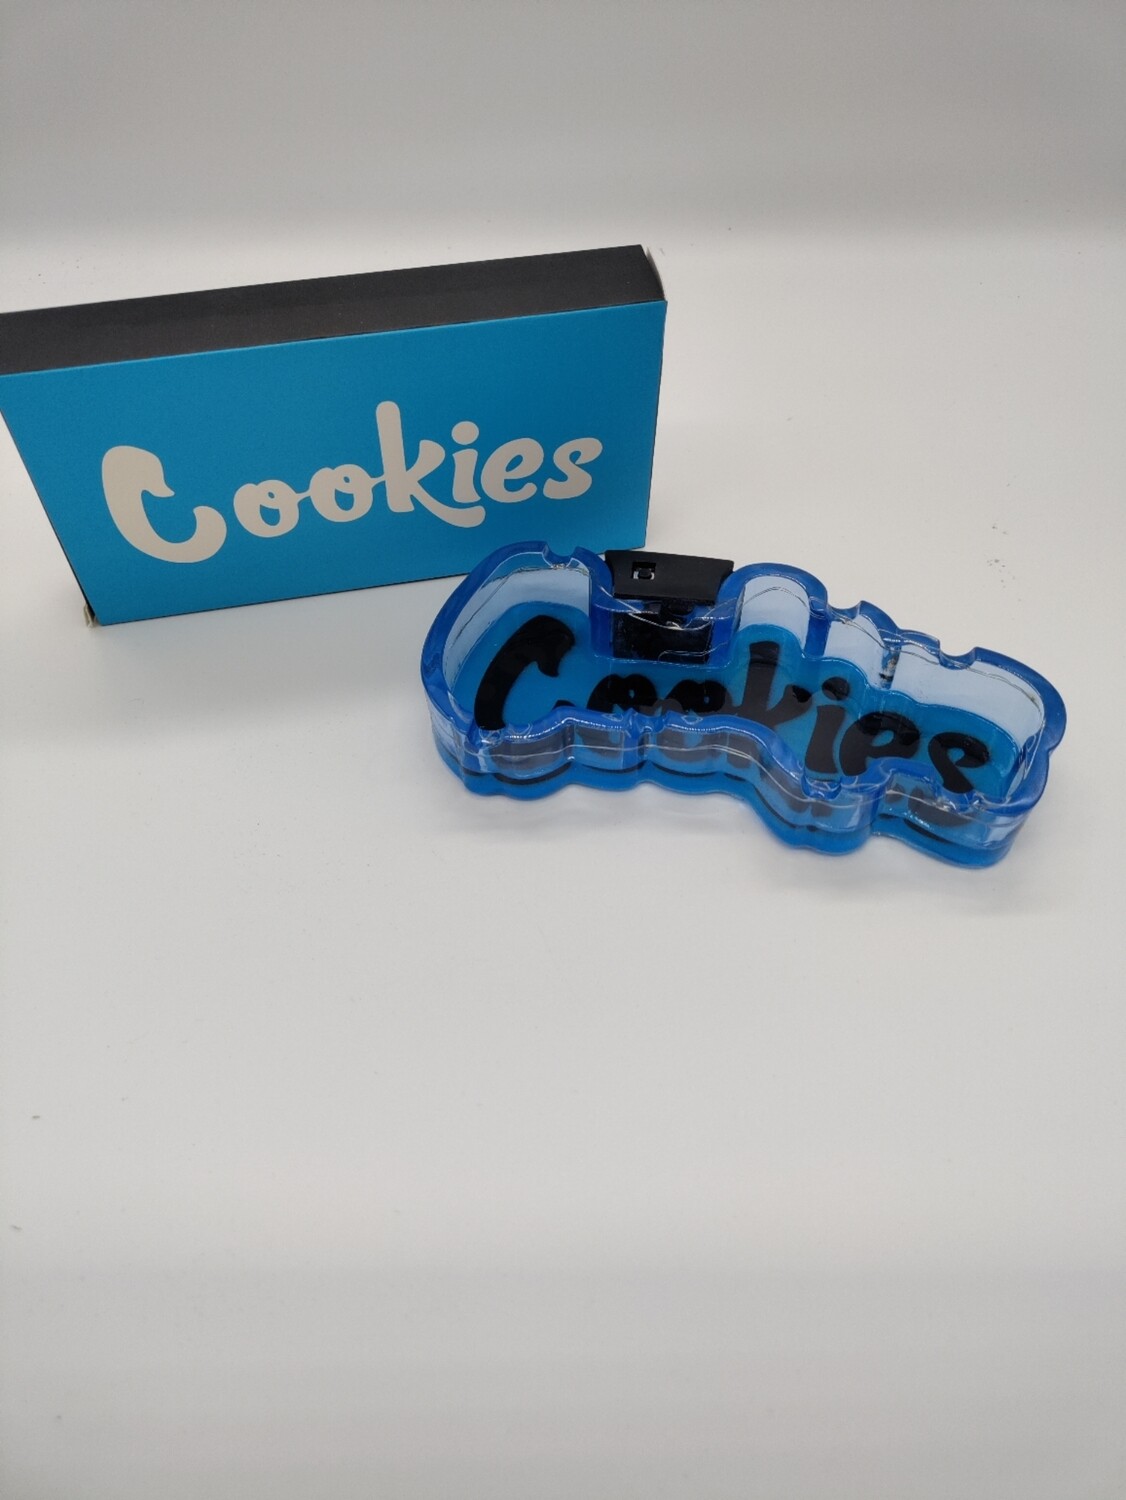 Cookie led ash tray